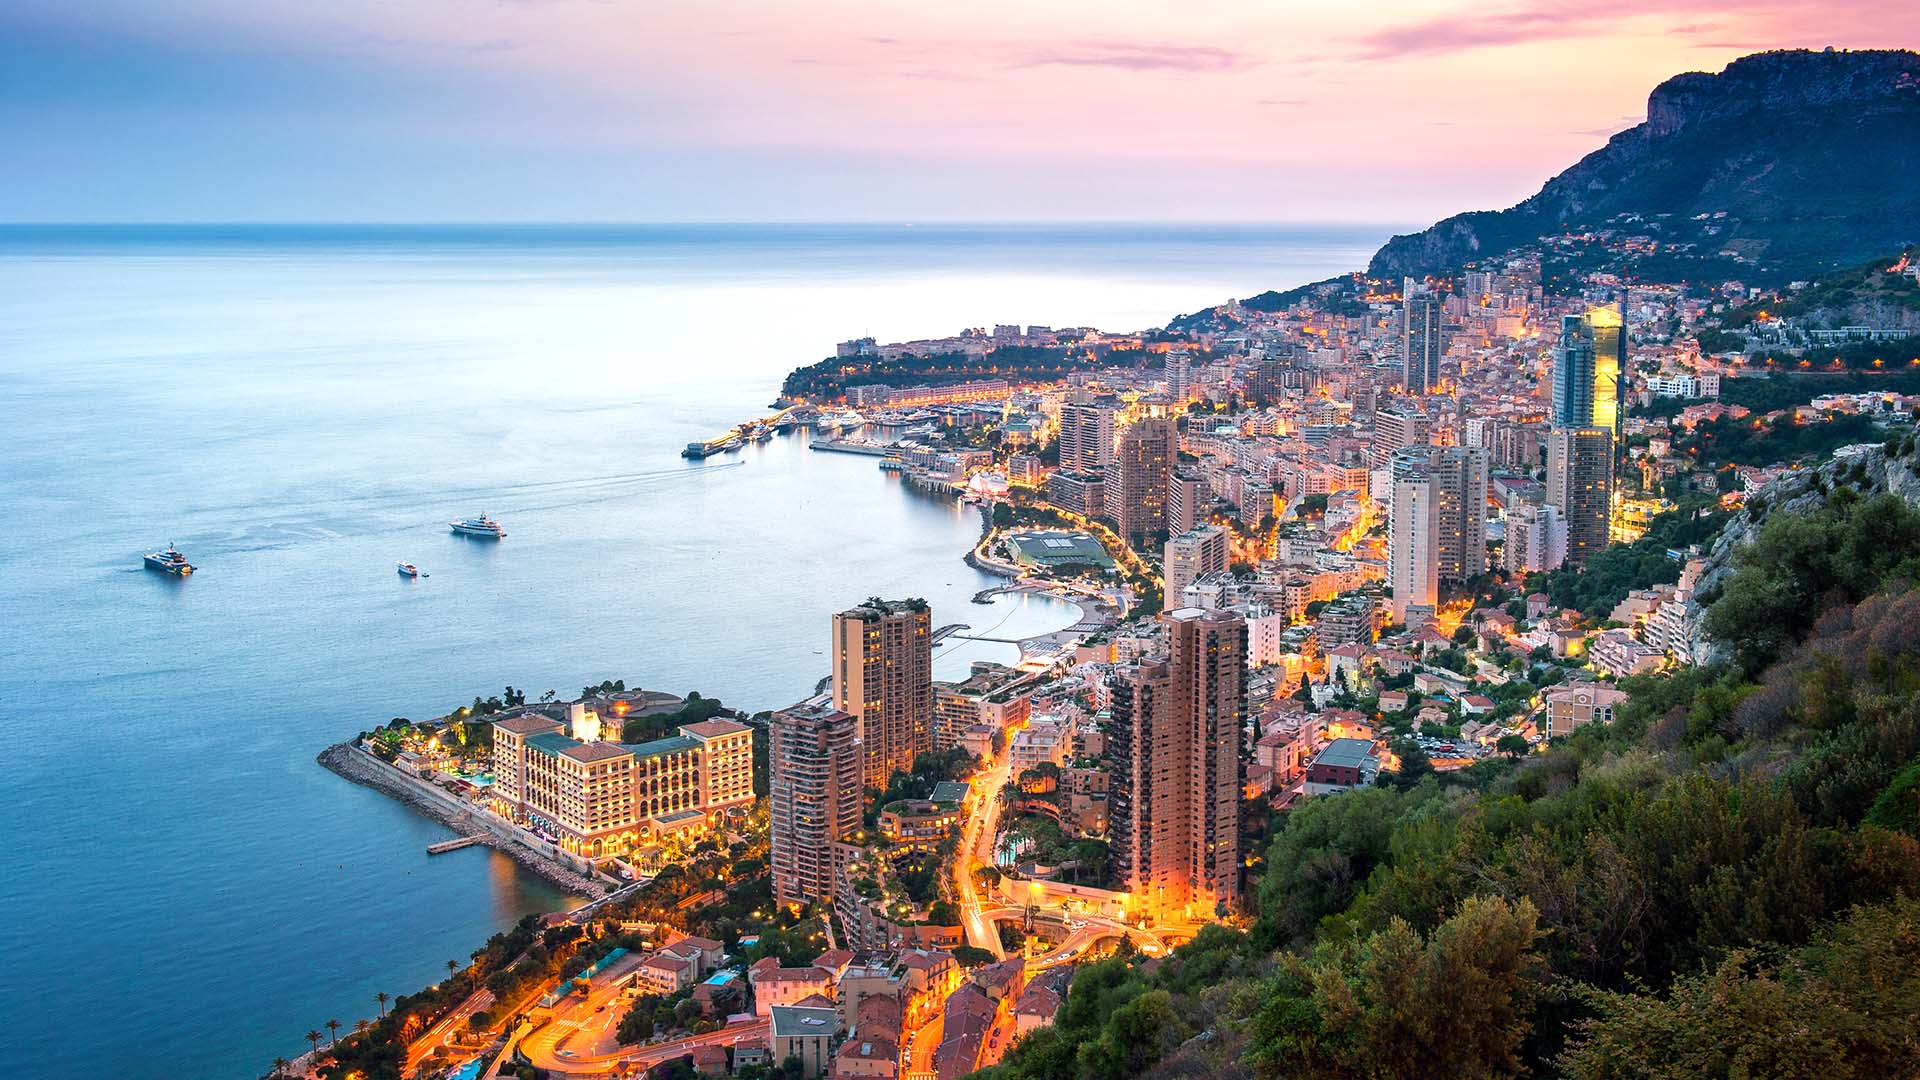 3 Days of Glamour Await on a Weekend Visit to Monaco